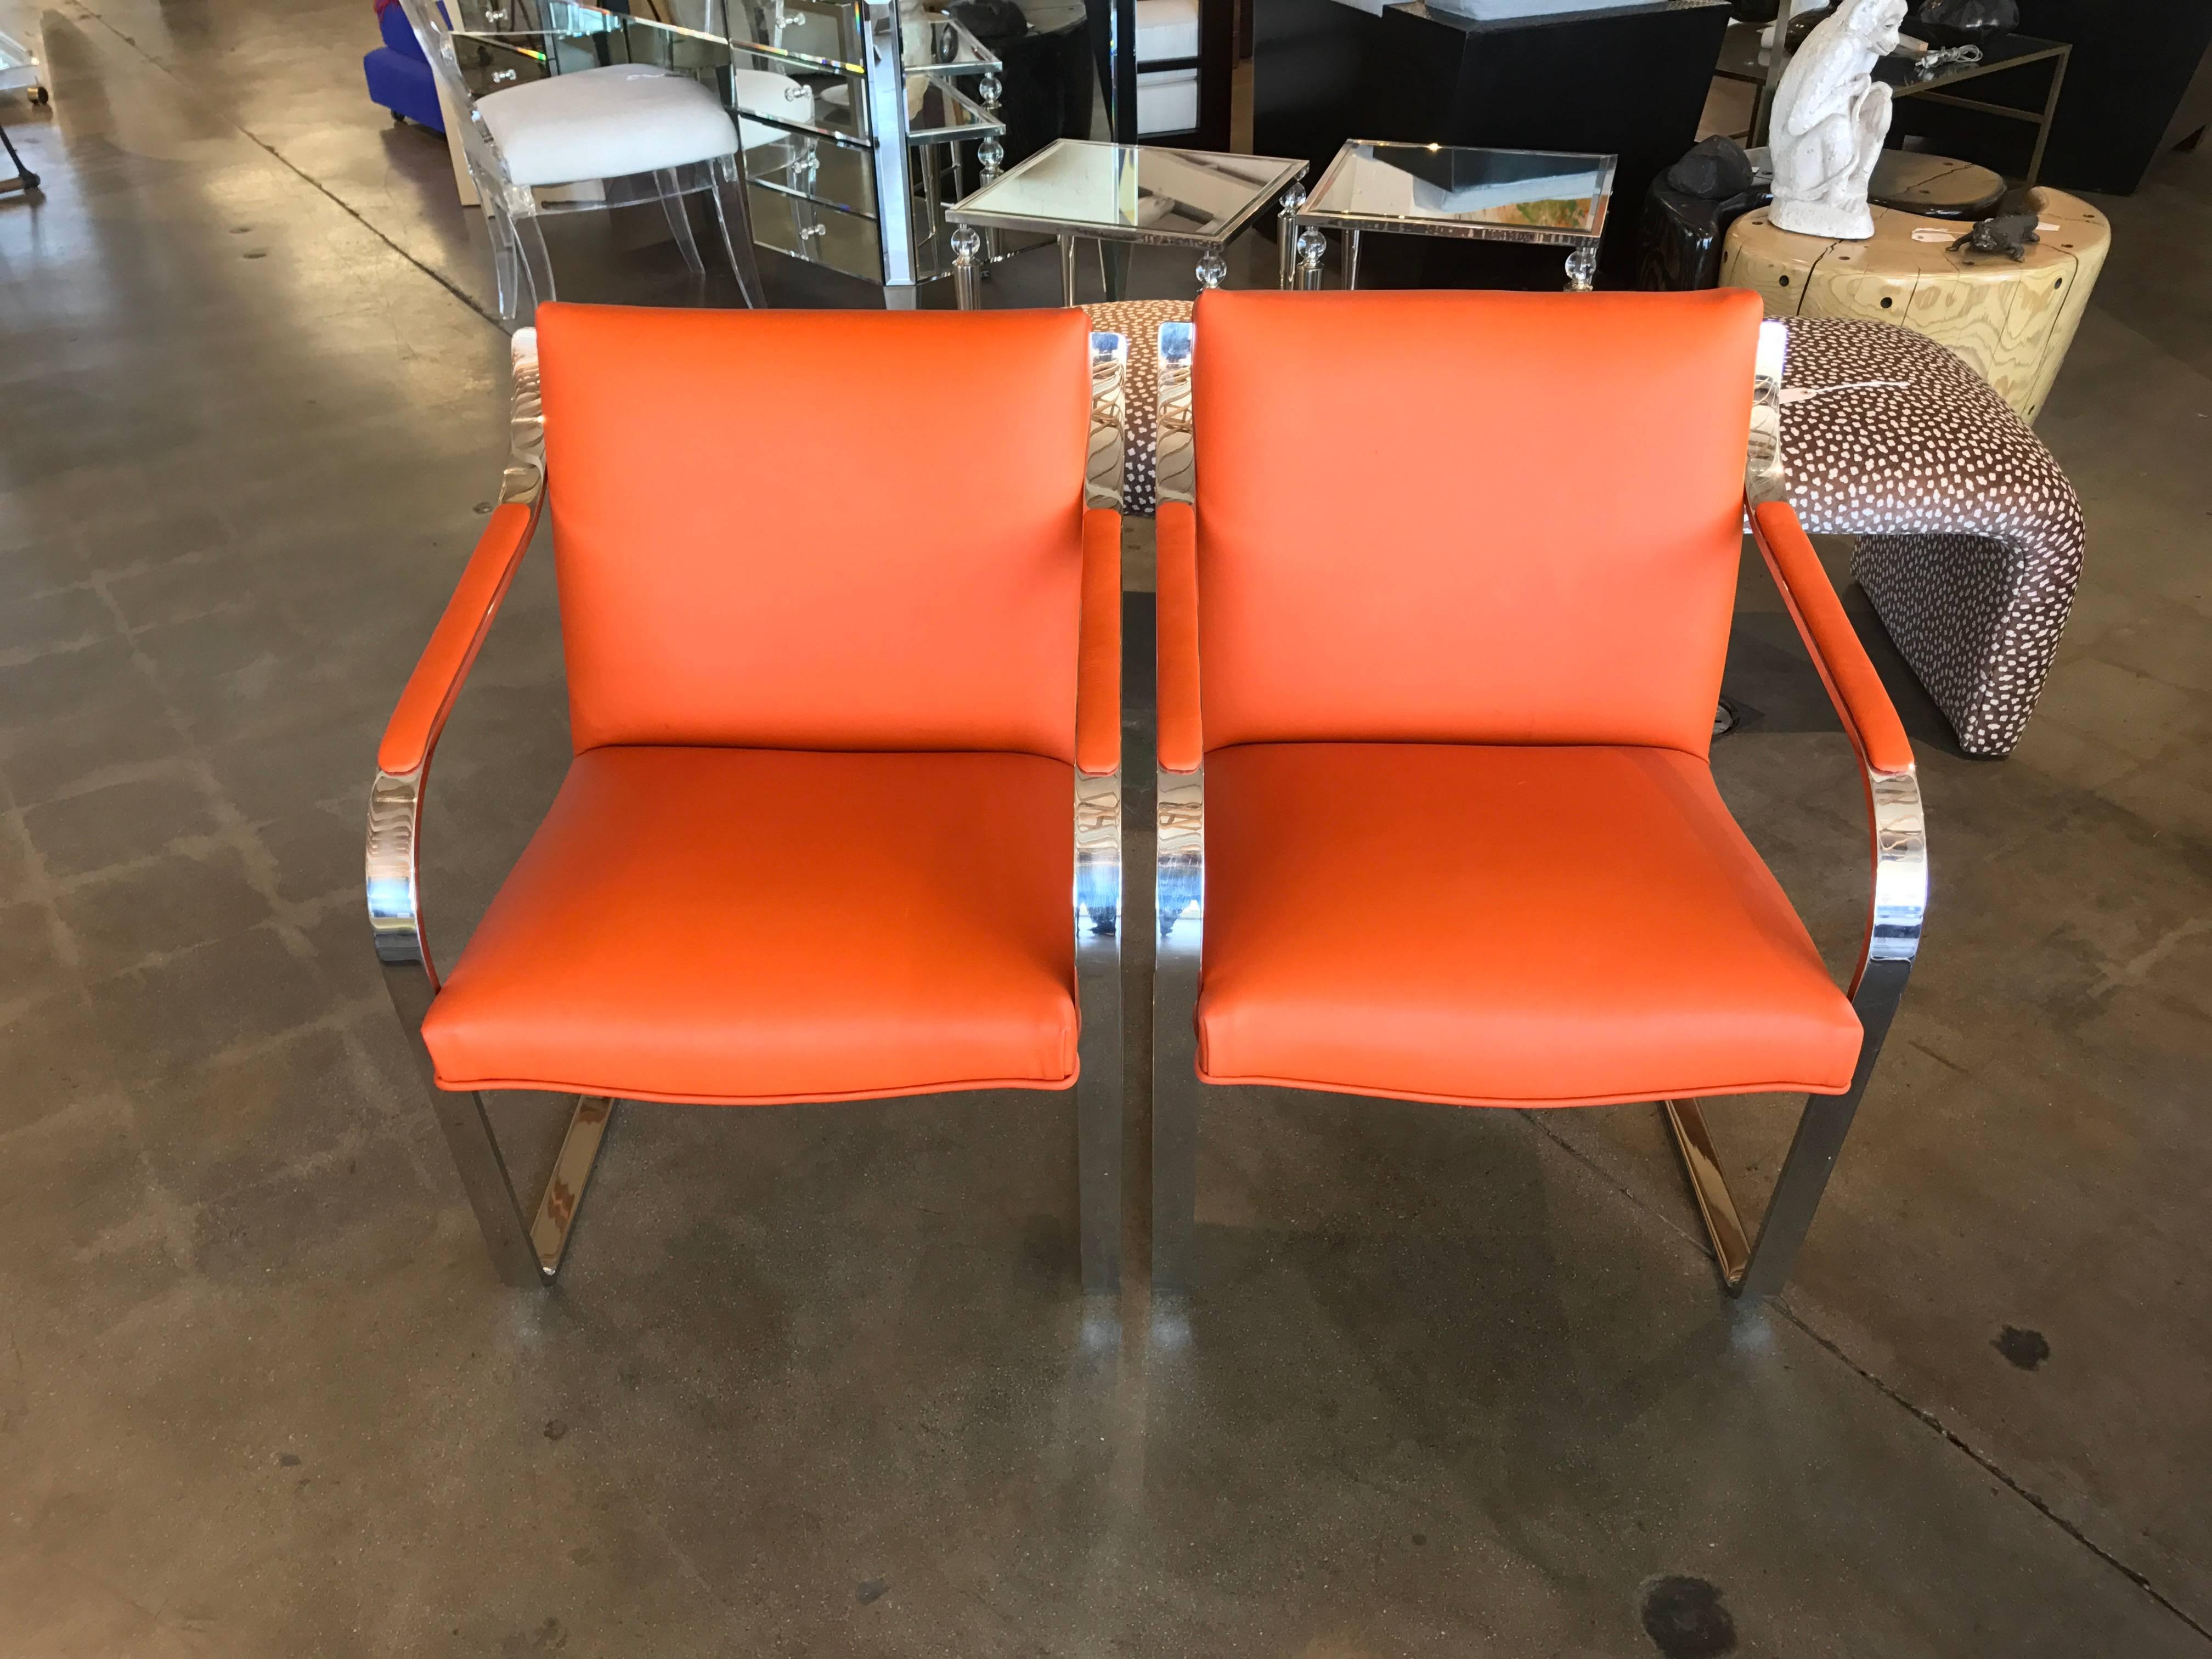 A nice older pair of Brueton Brno type chairs redone in a Hermes tone orange leather of nice quality. The chairs are slightly different in the way they have survived as one is a little more give in it, please see the photos. They are structurally